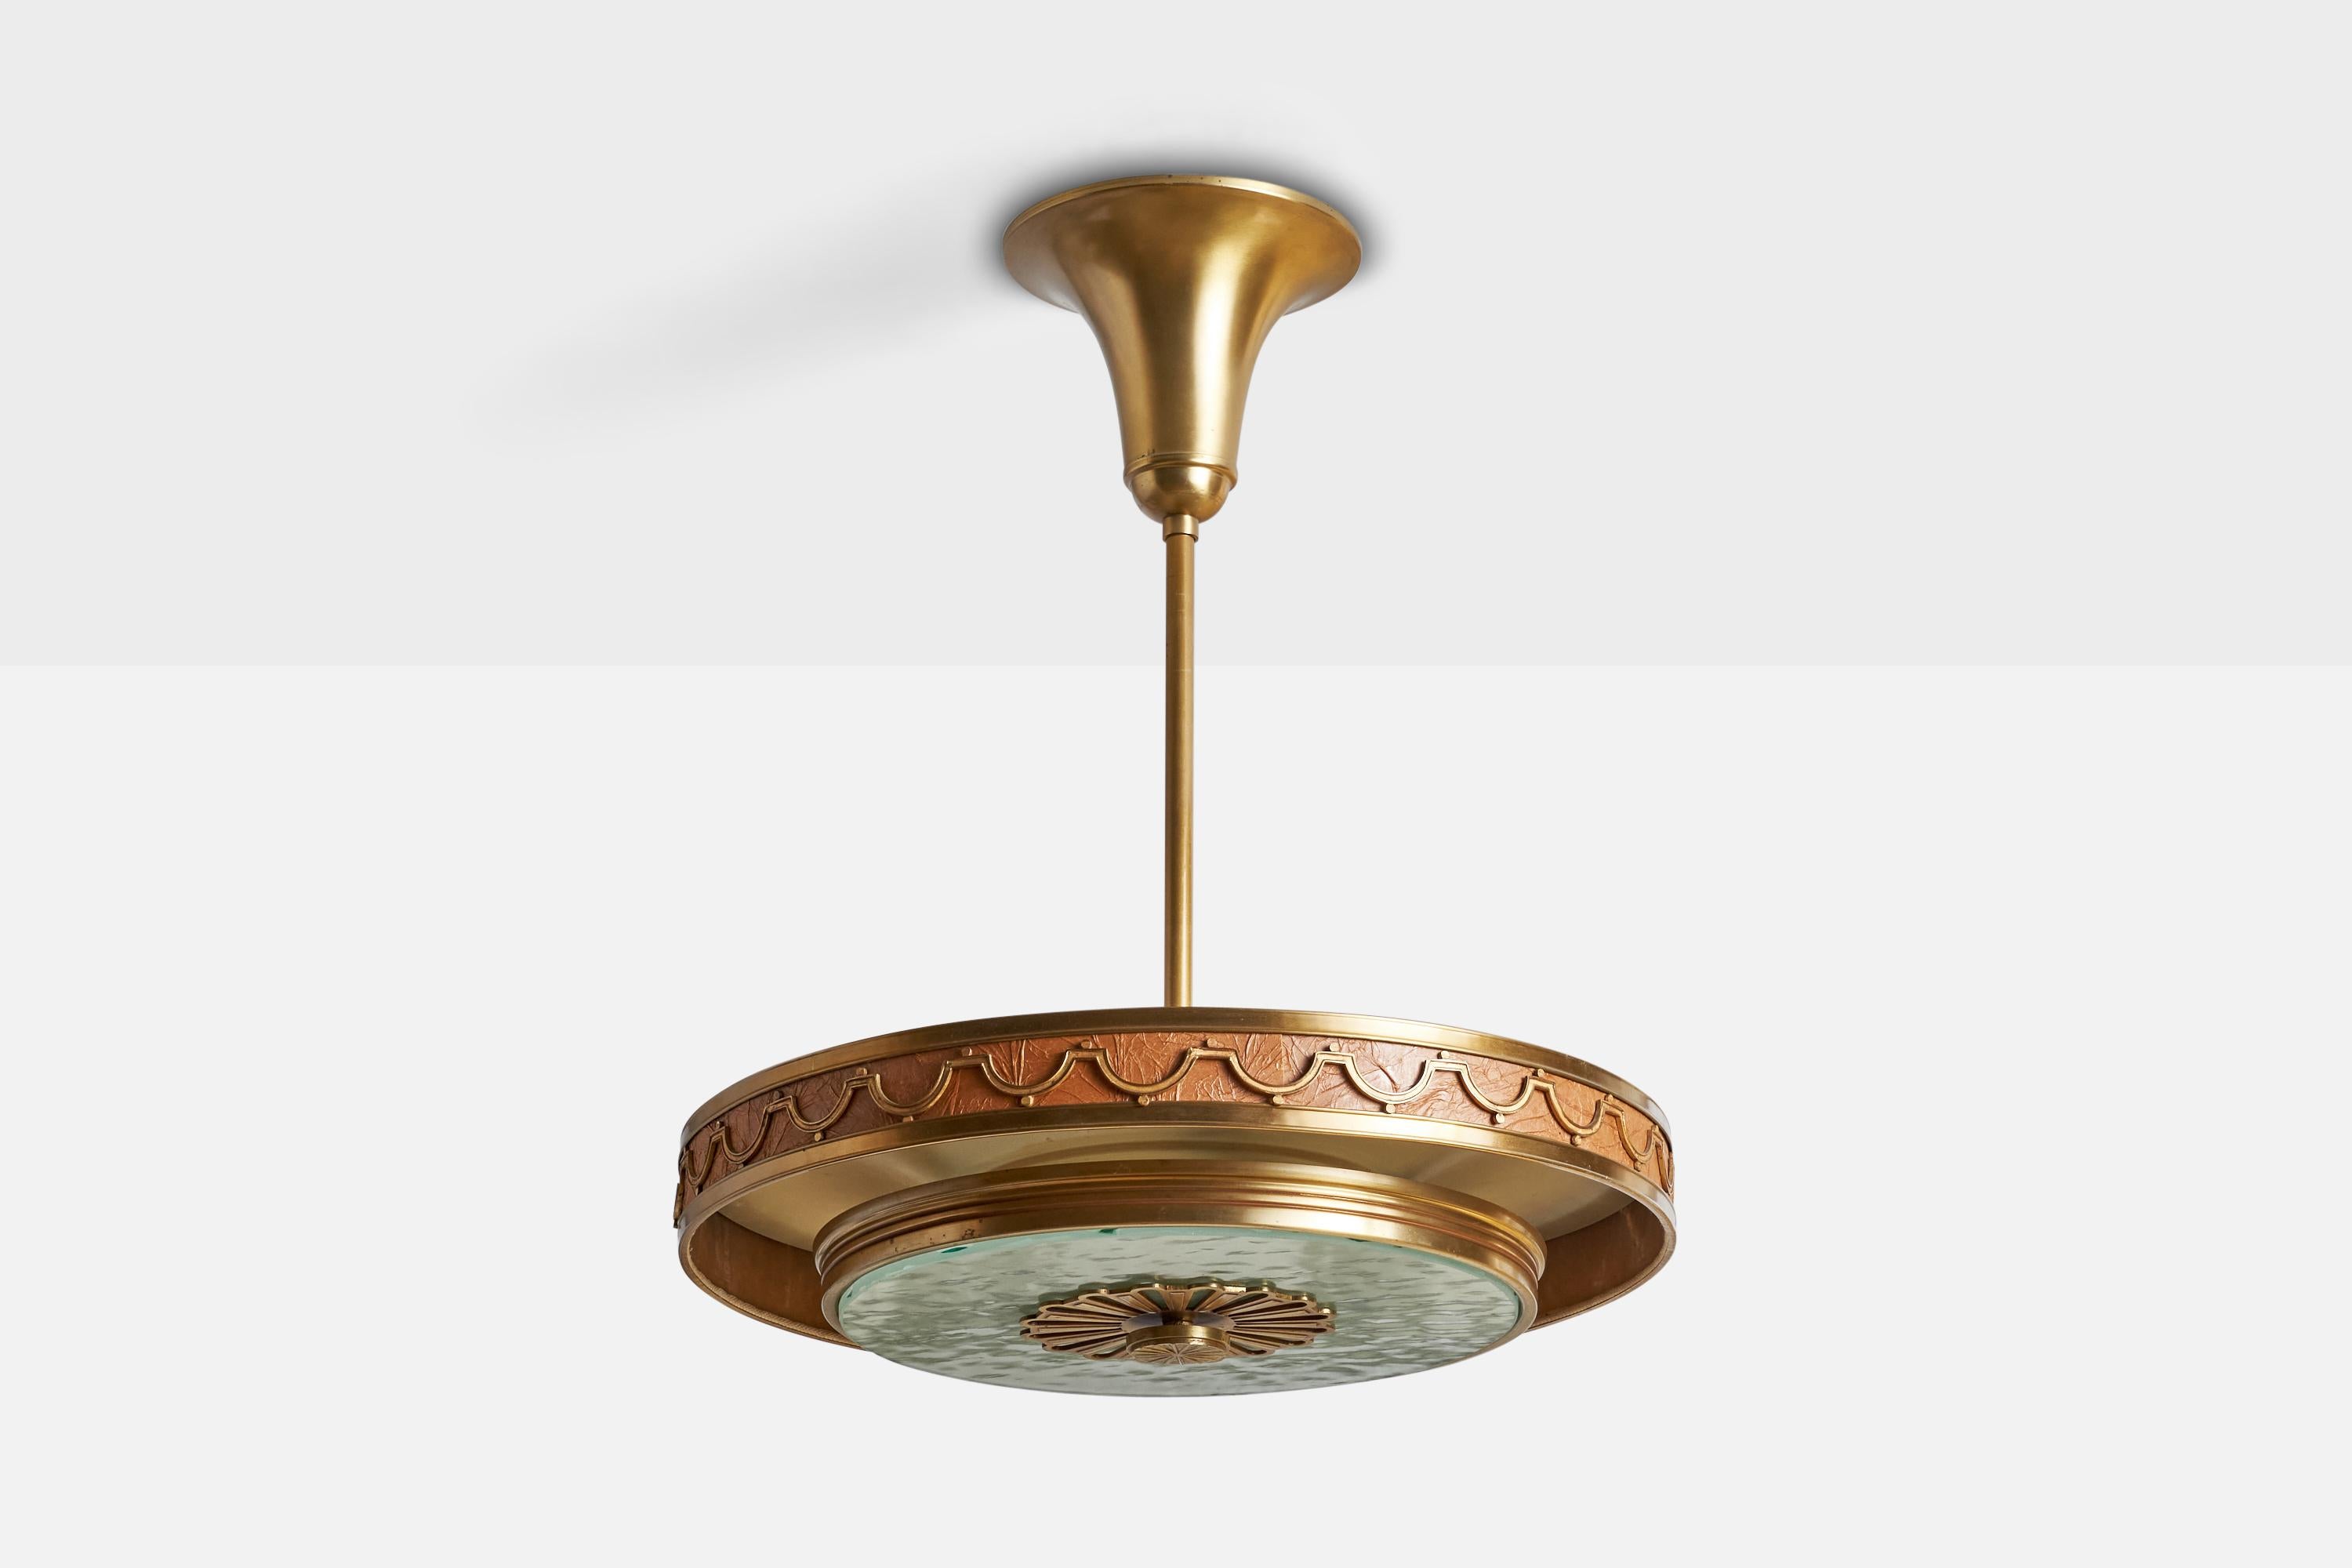 A brass, brown paper and glass pendant light designed and produced in Sweden, 1930s.

Dimensions of canopy (inches): 7.5” H x 9” Diameter
Socket takes standard E-26 bulbs. 3 sockets.
socket takes standard E-14 bulbs. 6 sockets.There is no maximum